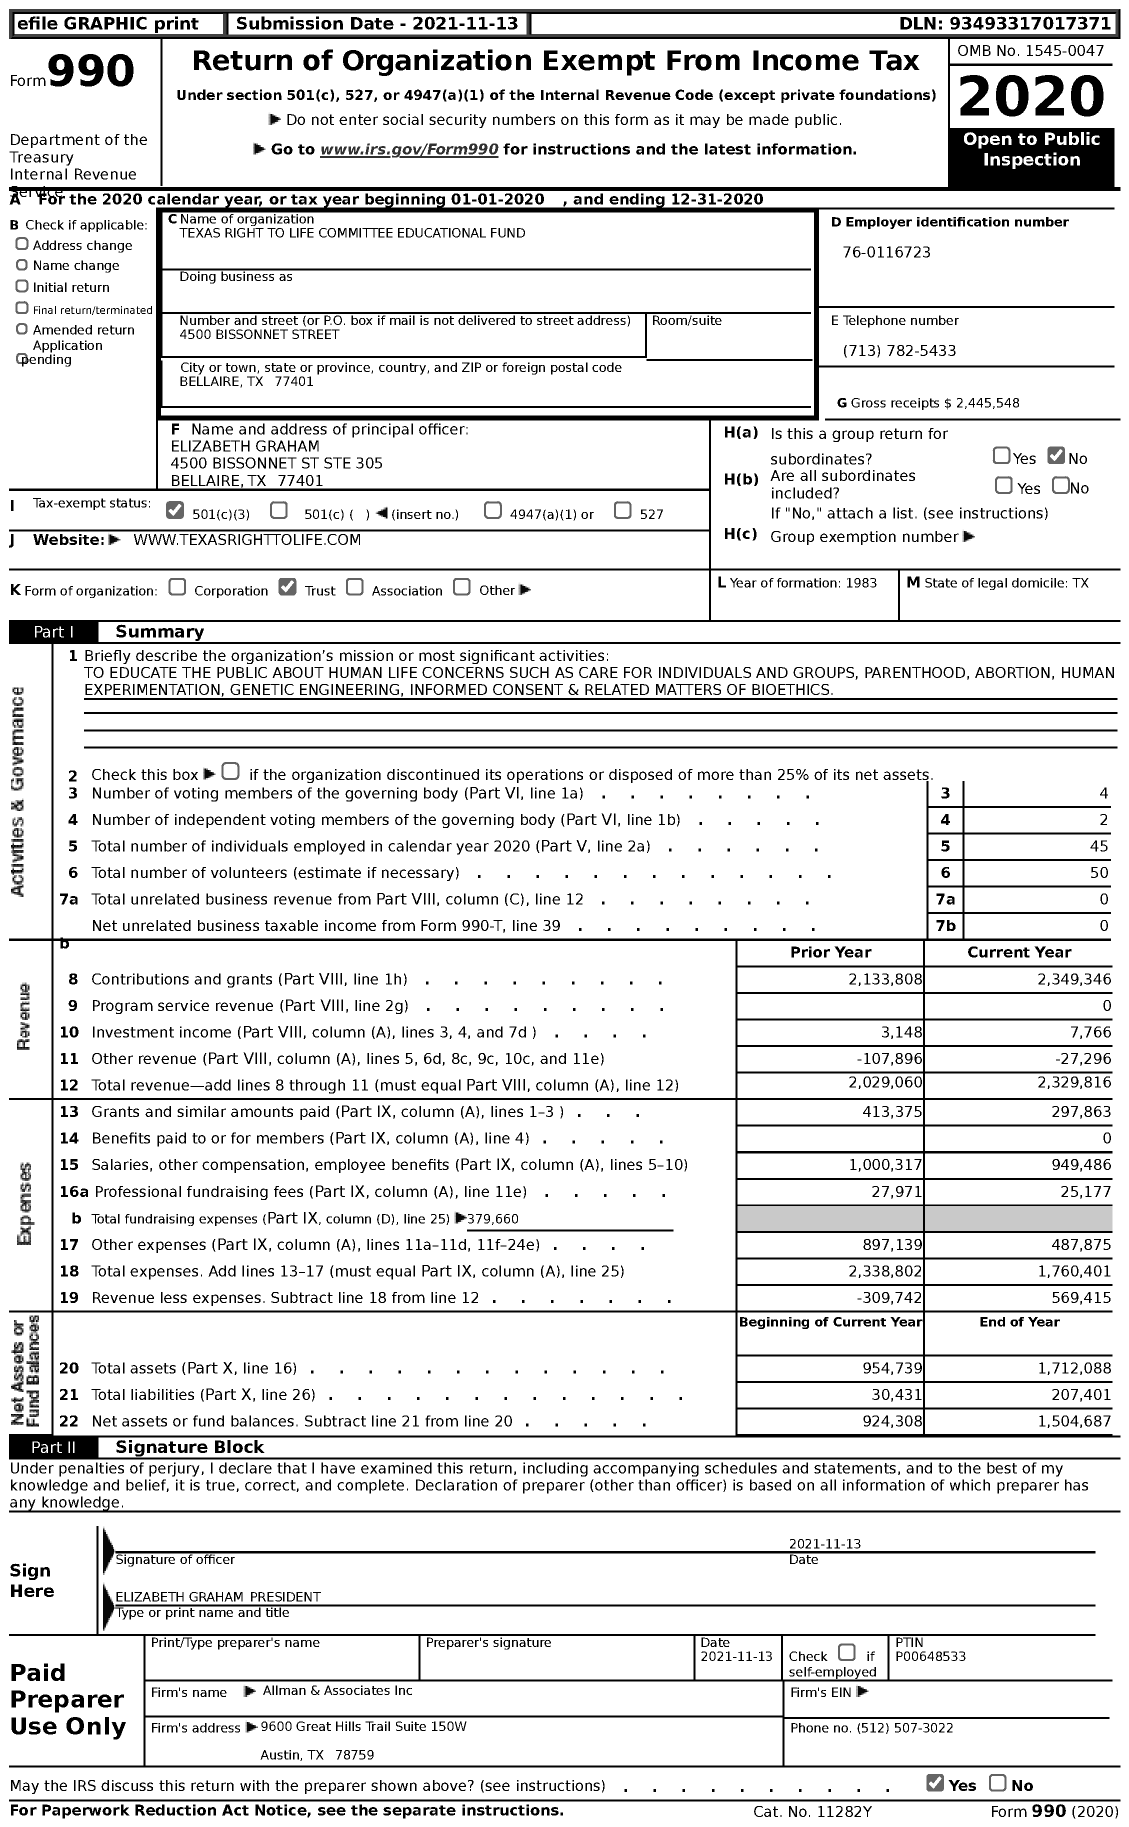 Image of first page of 2020 Form 990 for Texas Right To Life Committee Educational Fund